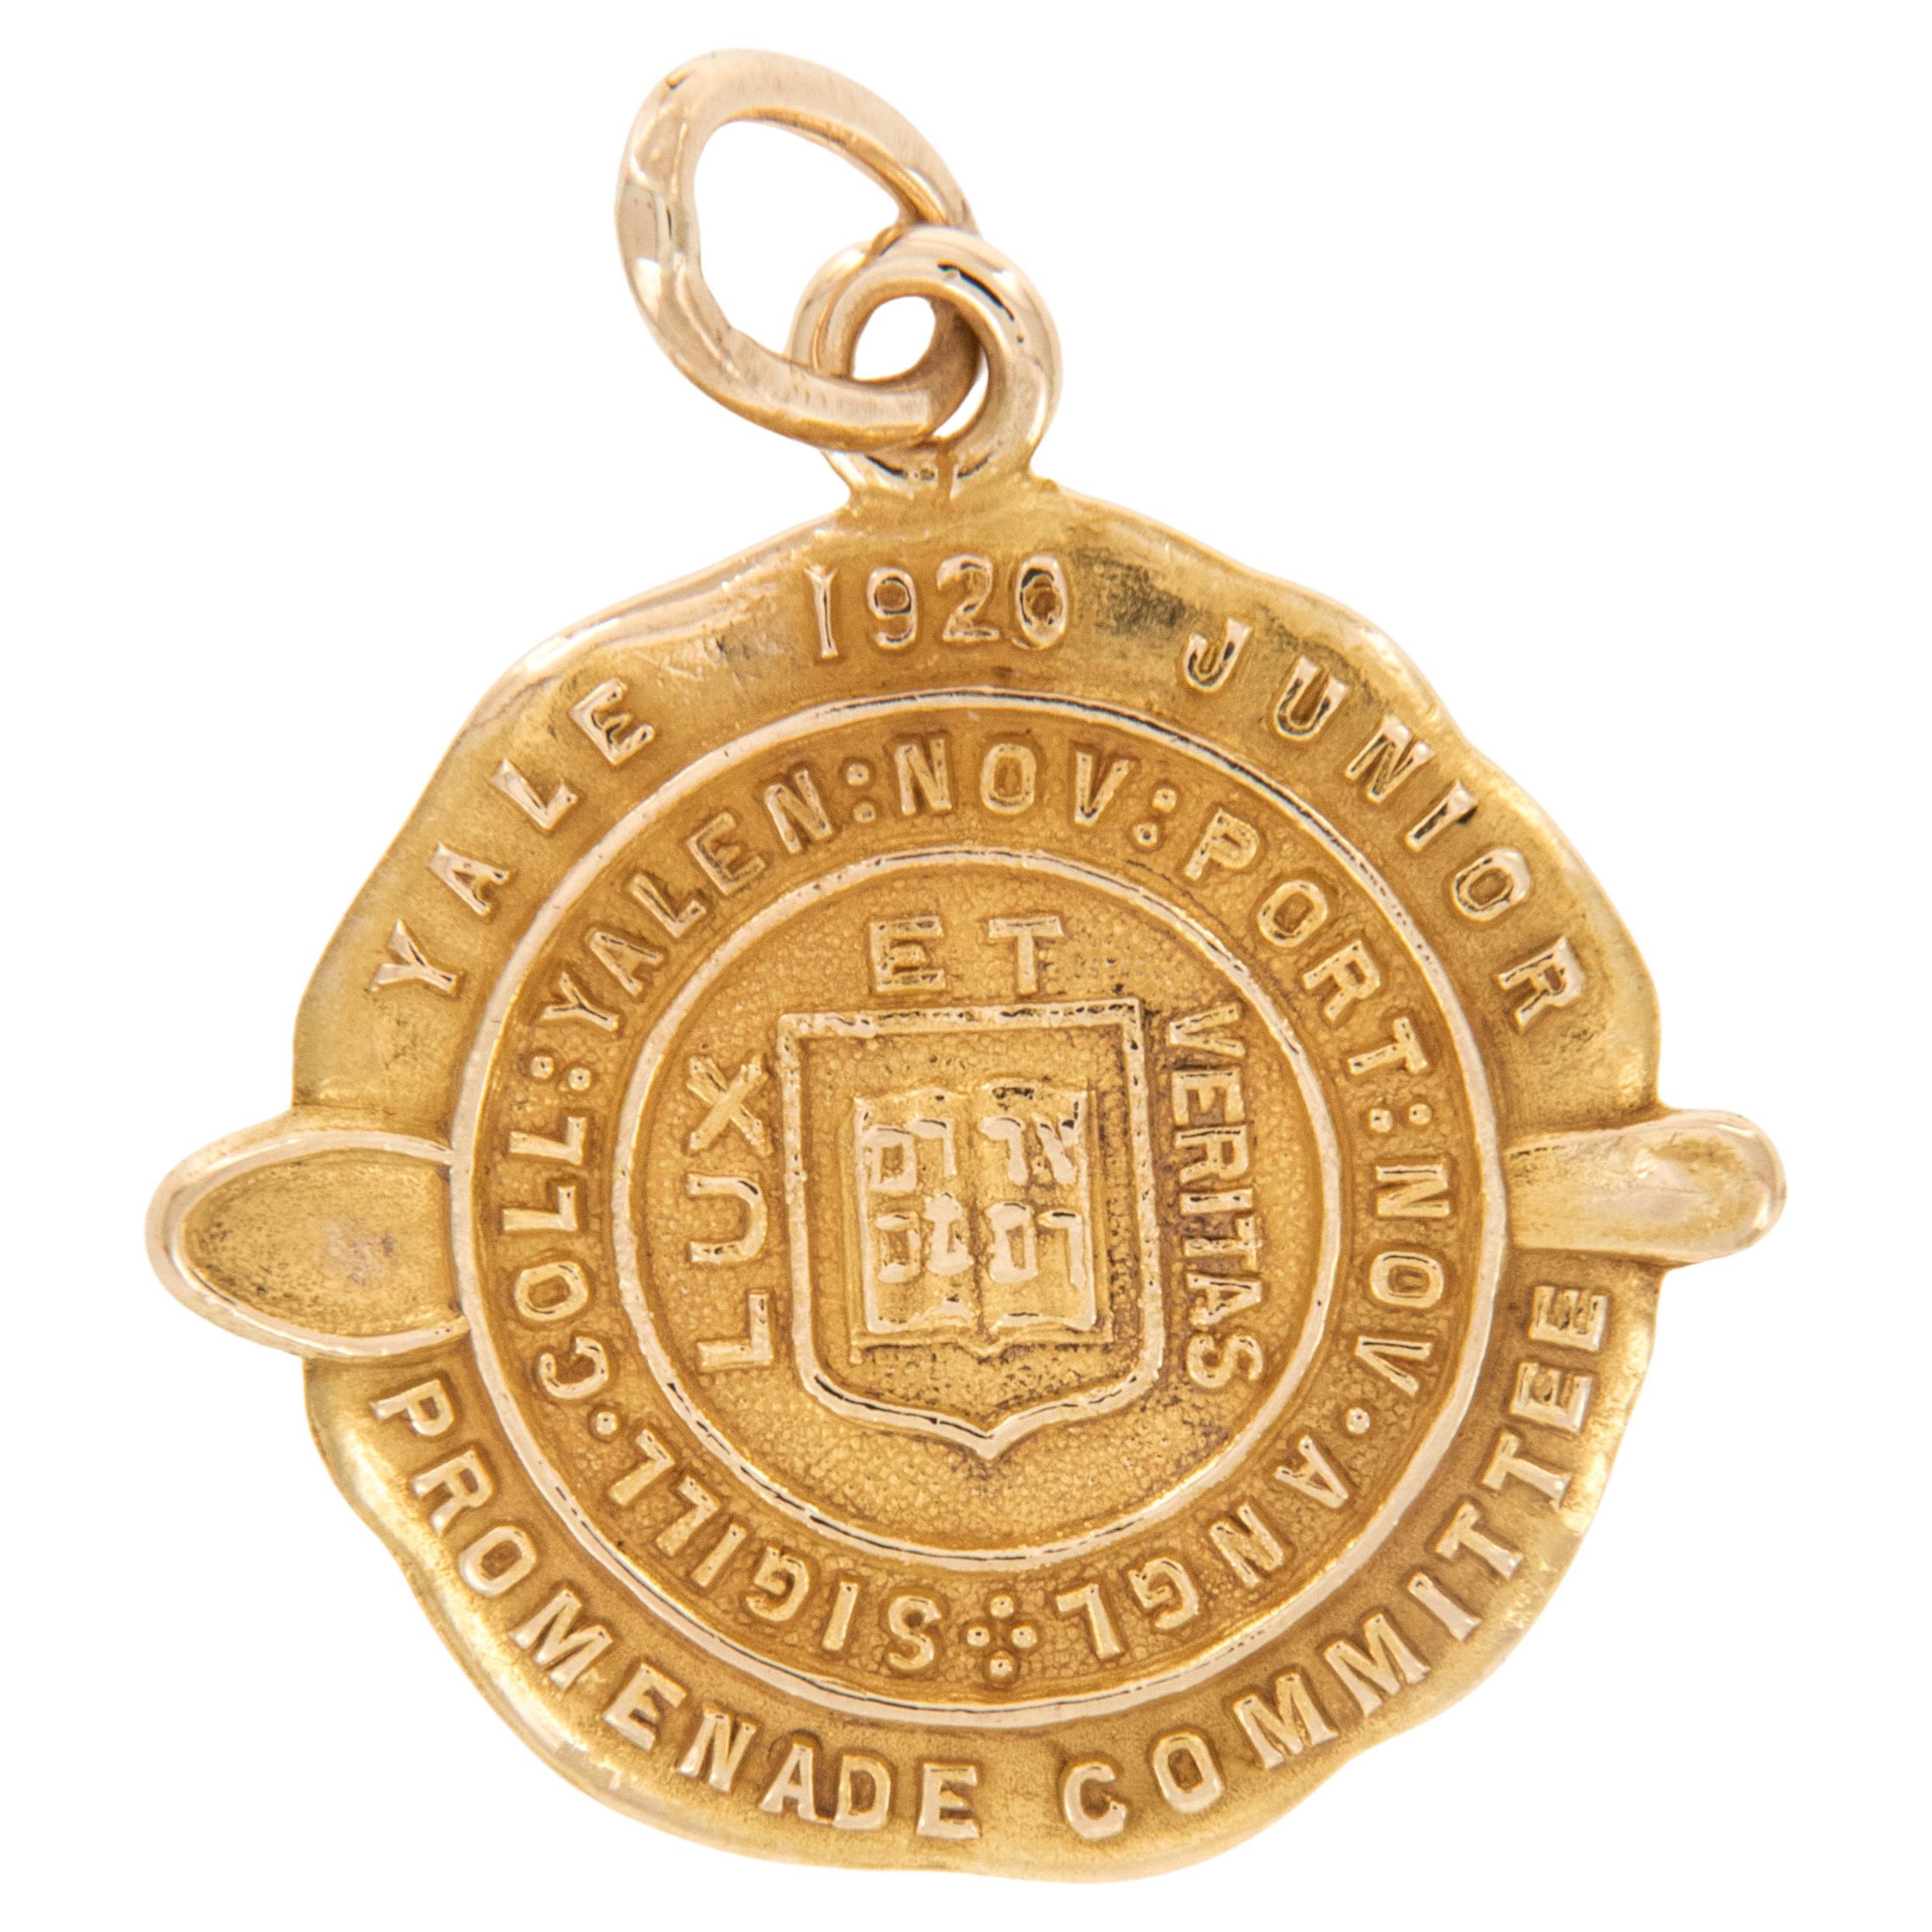 Rarely seen 14 Karat Yellow Gold 1920 Yale Junior Promenade Committee Charm  For Sale